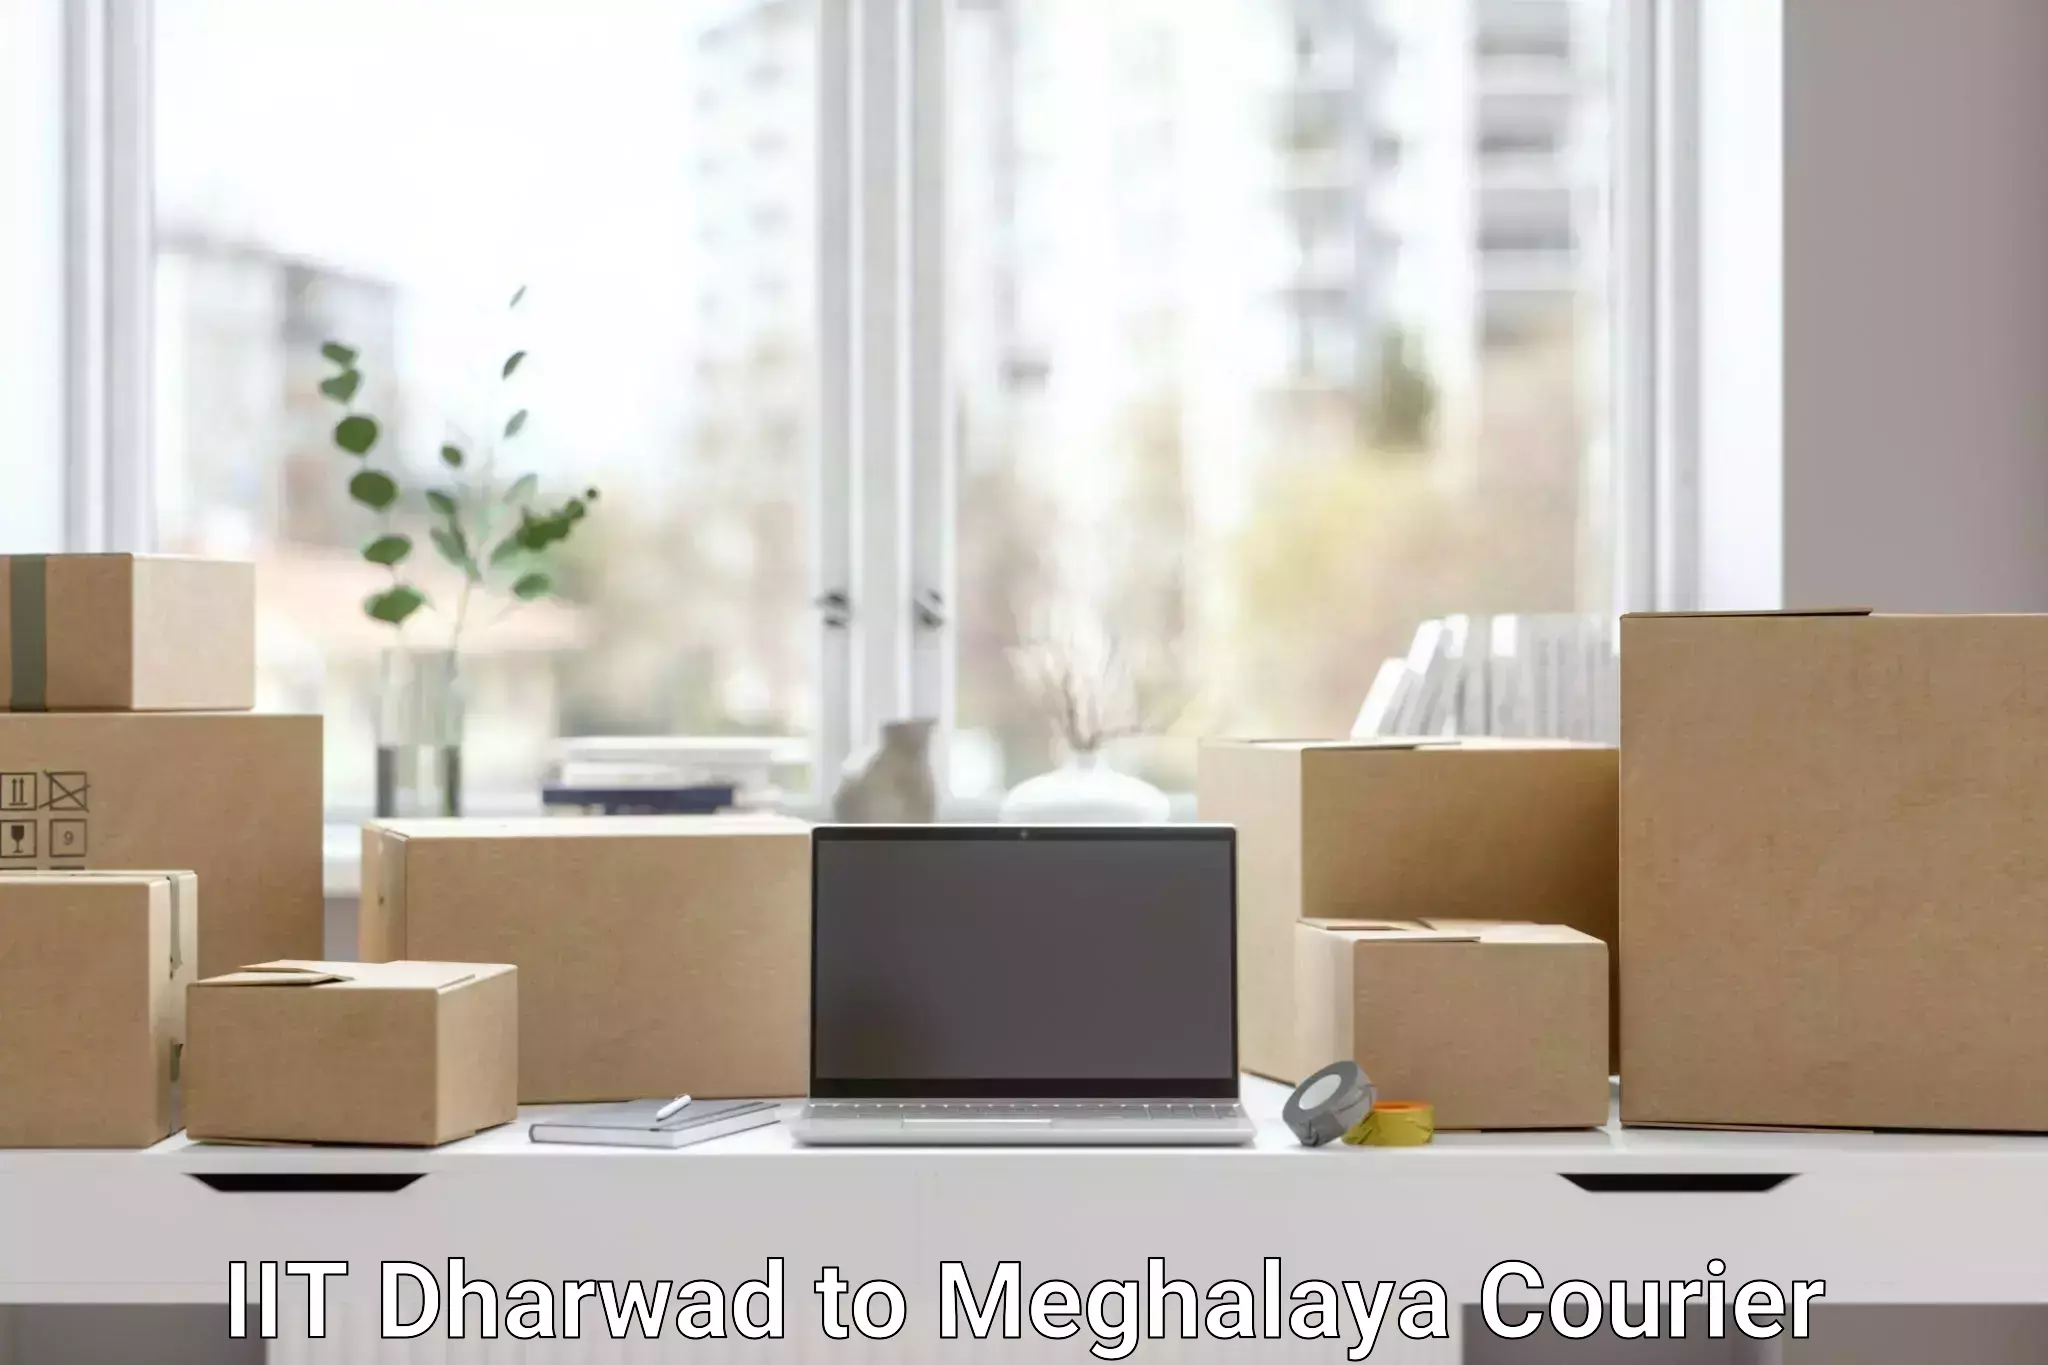 Nationwide shipping coverage in IIT Dharwad to Nongpoh